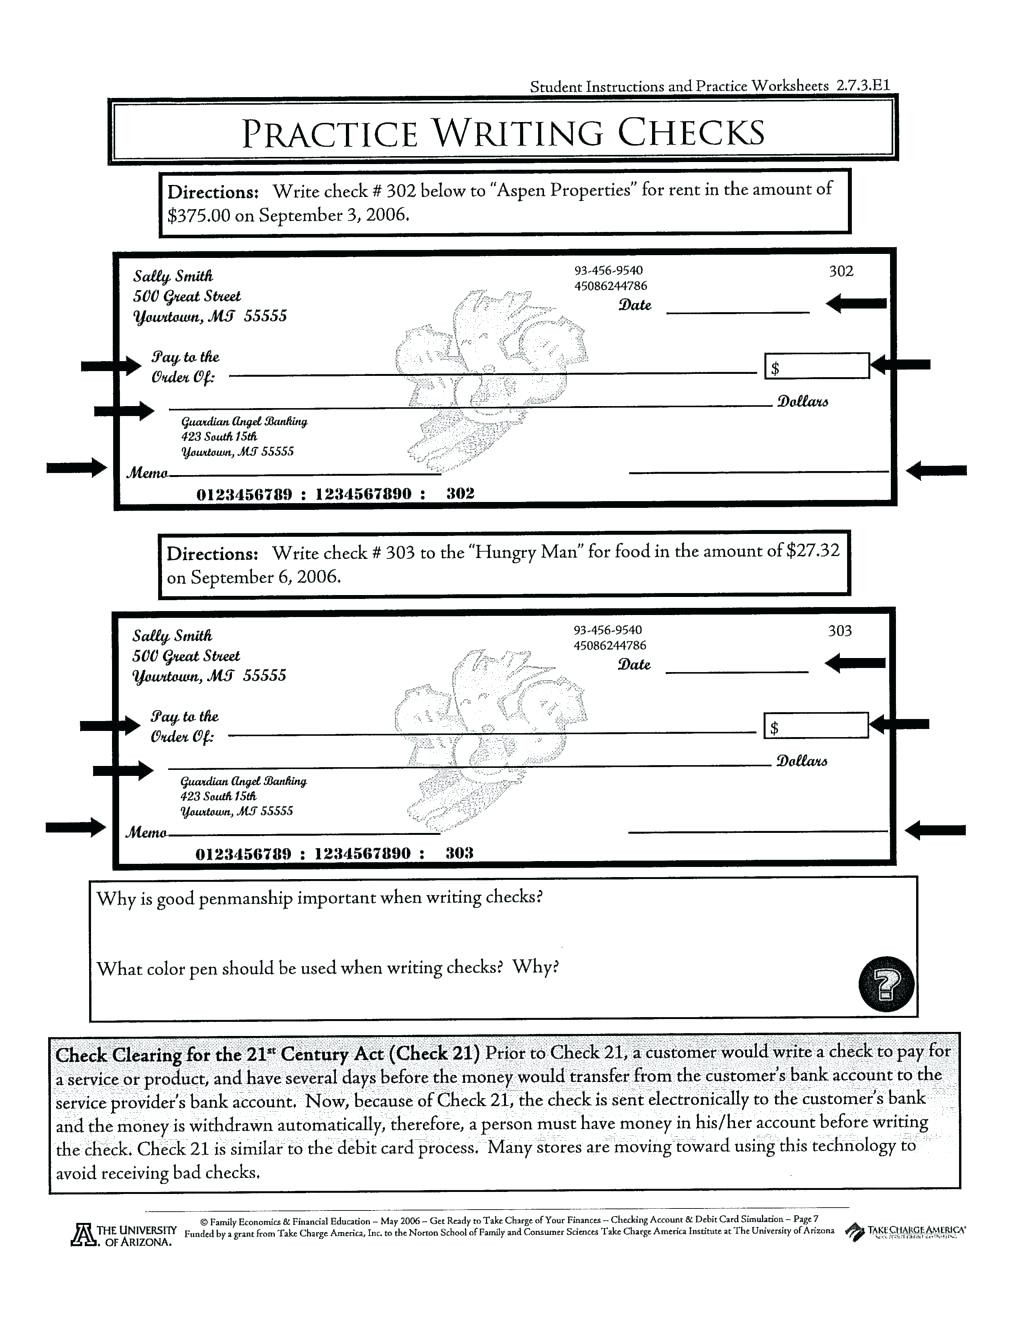 Check Writing Practice Worksheet Student Instructions And